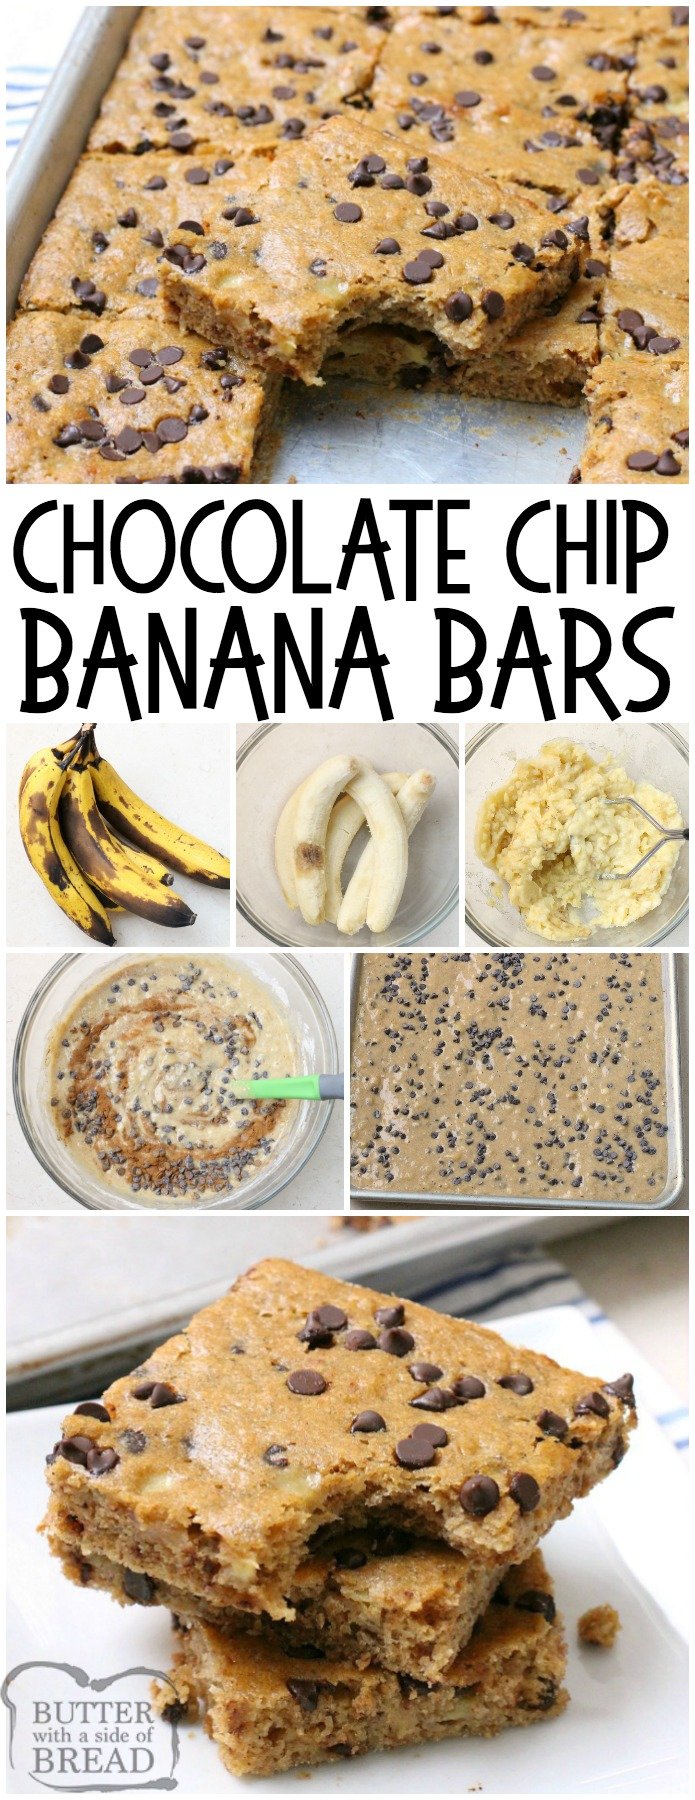 Chocolate Chip Banana Bars are a simple & delicious banana bar recipe that's even better than banana bread! Made with 5 ripe bananas, they're the perfect banana recipe. Great for breakfast, lunch and snacks in between. Check out all the 5 star reviews- everyone raves about these Chocolate Chip Banana Bars! #banana #recipe #chocolate #chocolatechip #breakfast #lunch #snack #bananas #recipes Fantastic BANANA RECIPE from BUTTER WITH A SIDE OF BREAD